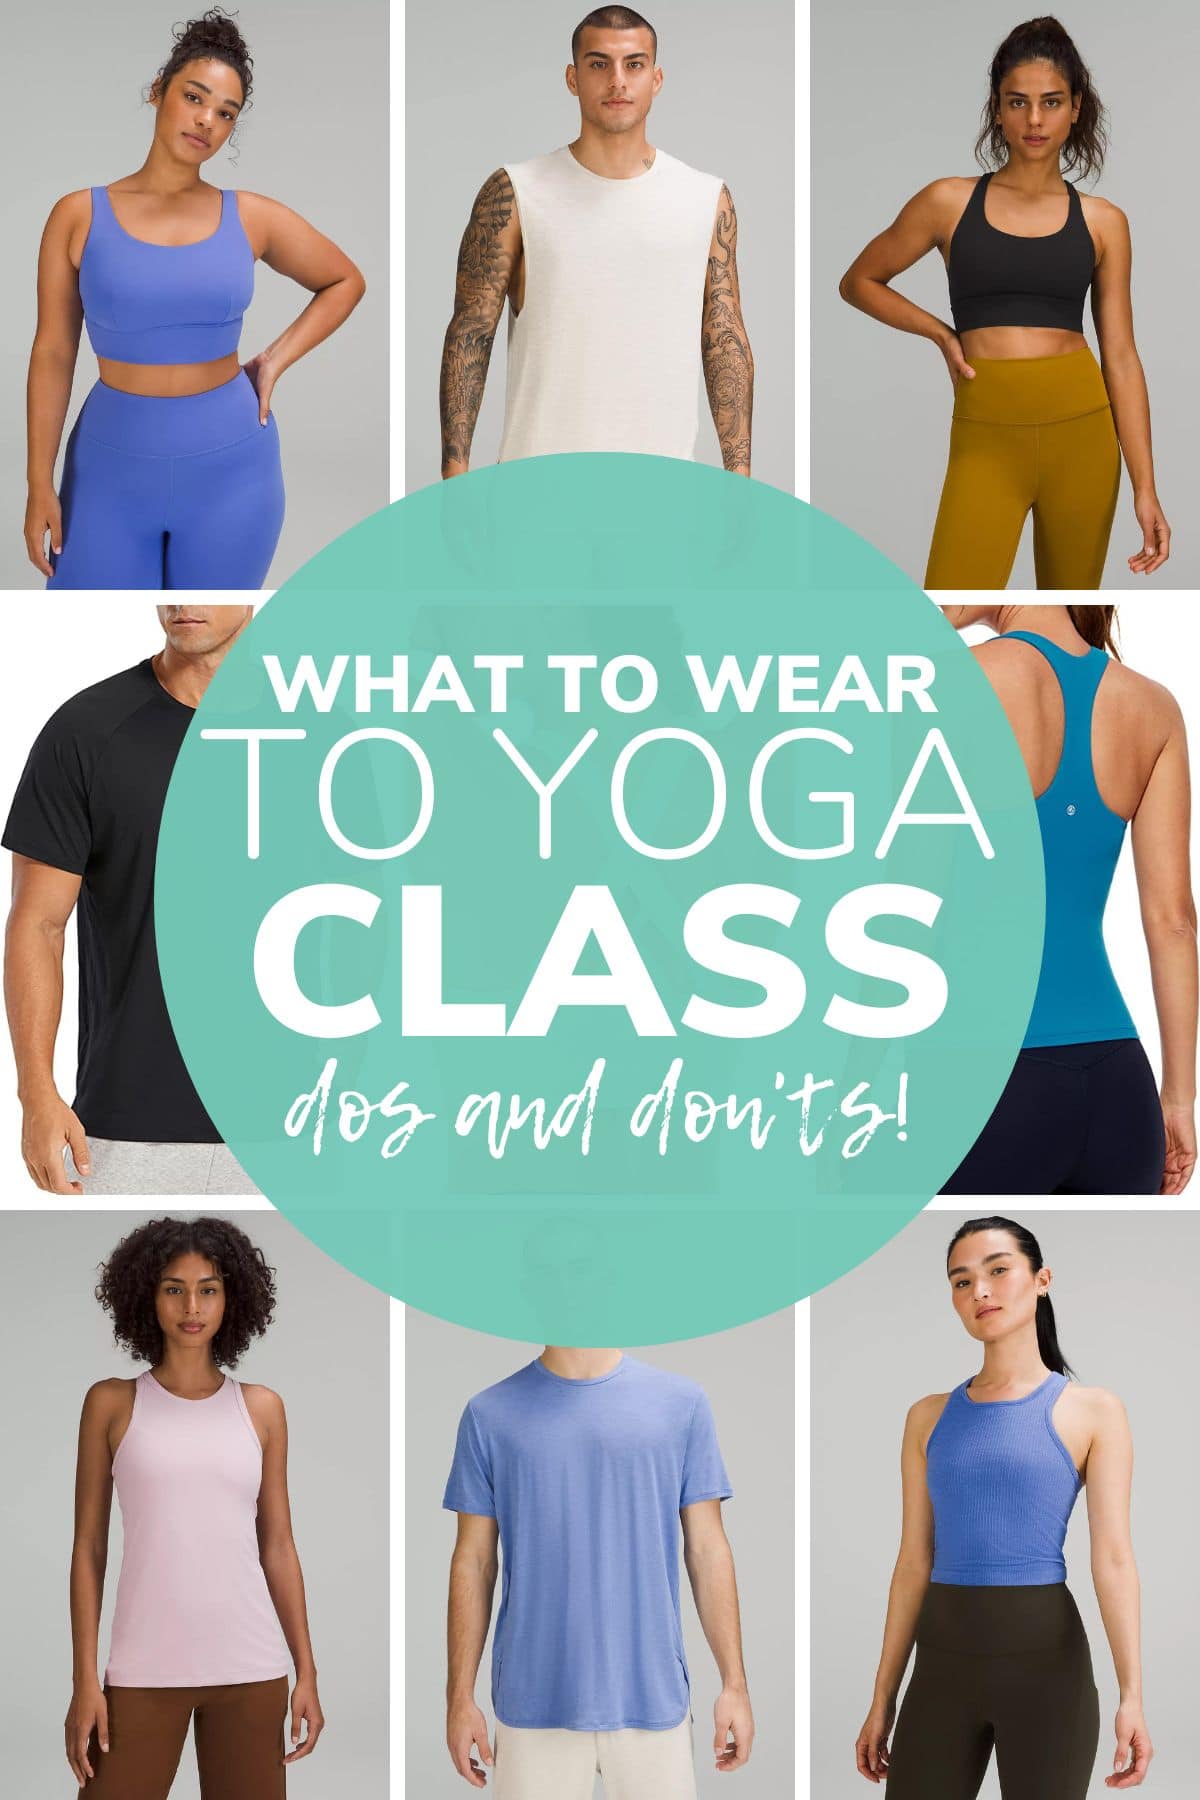 Photo collage of yoga outfits with text overlay that reads "What To Wear To Yoga Class Dos and Don'ts".